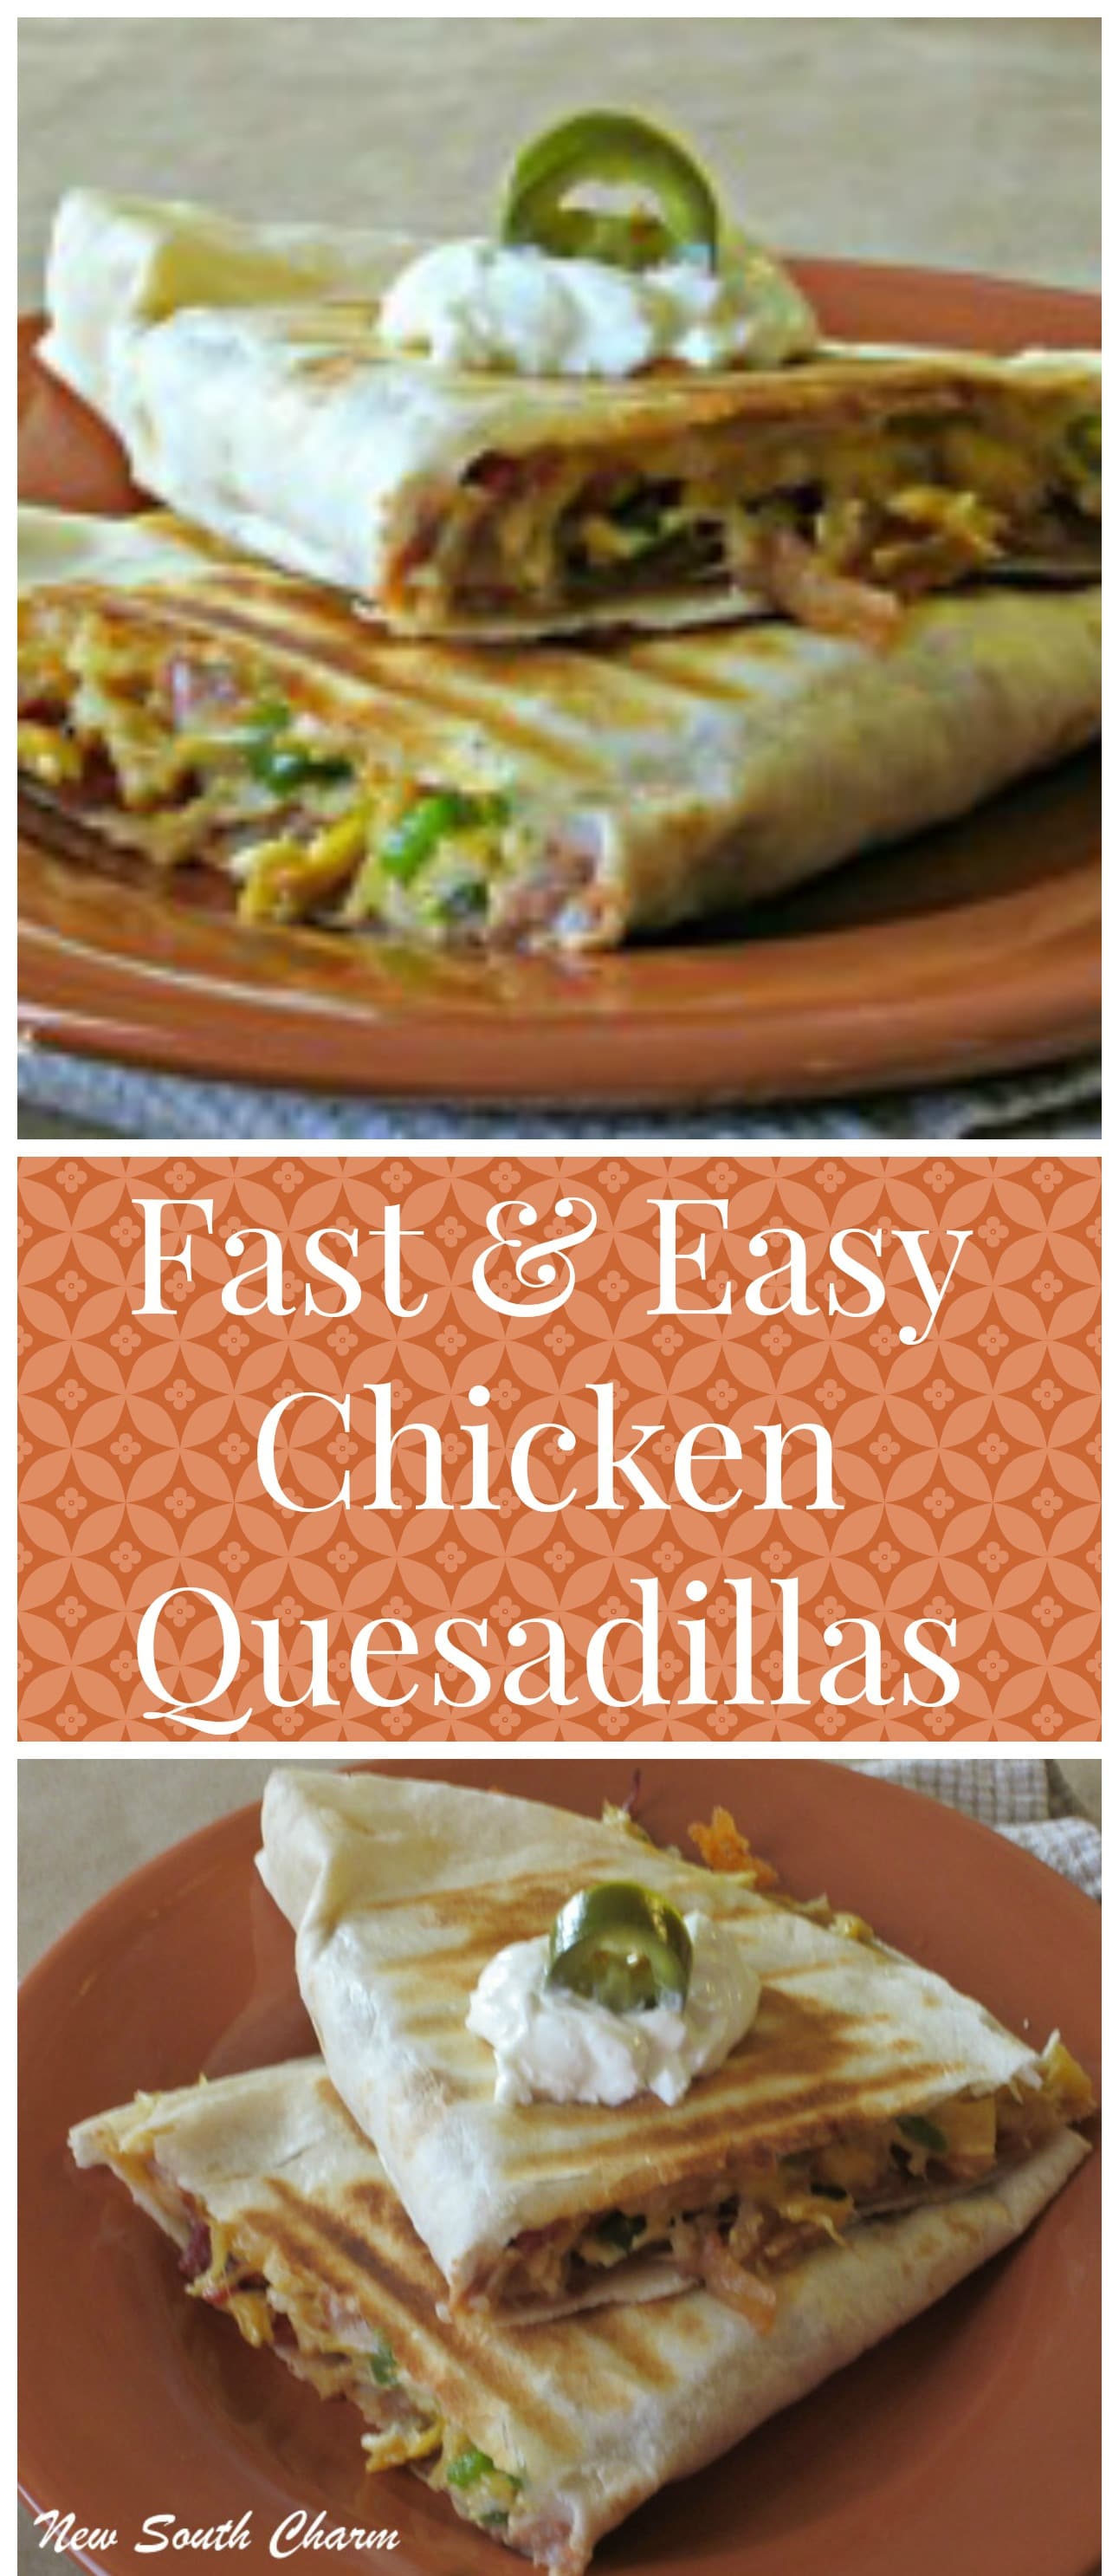 Fast and Easy Chicken Quesadillas - New South Charm: